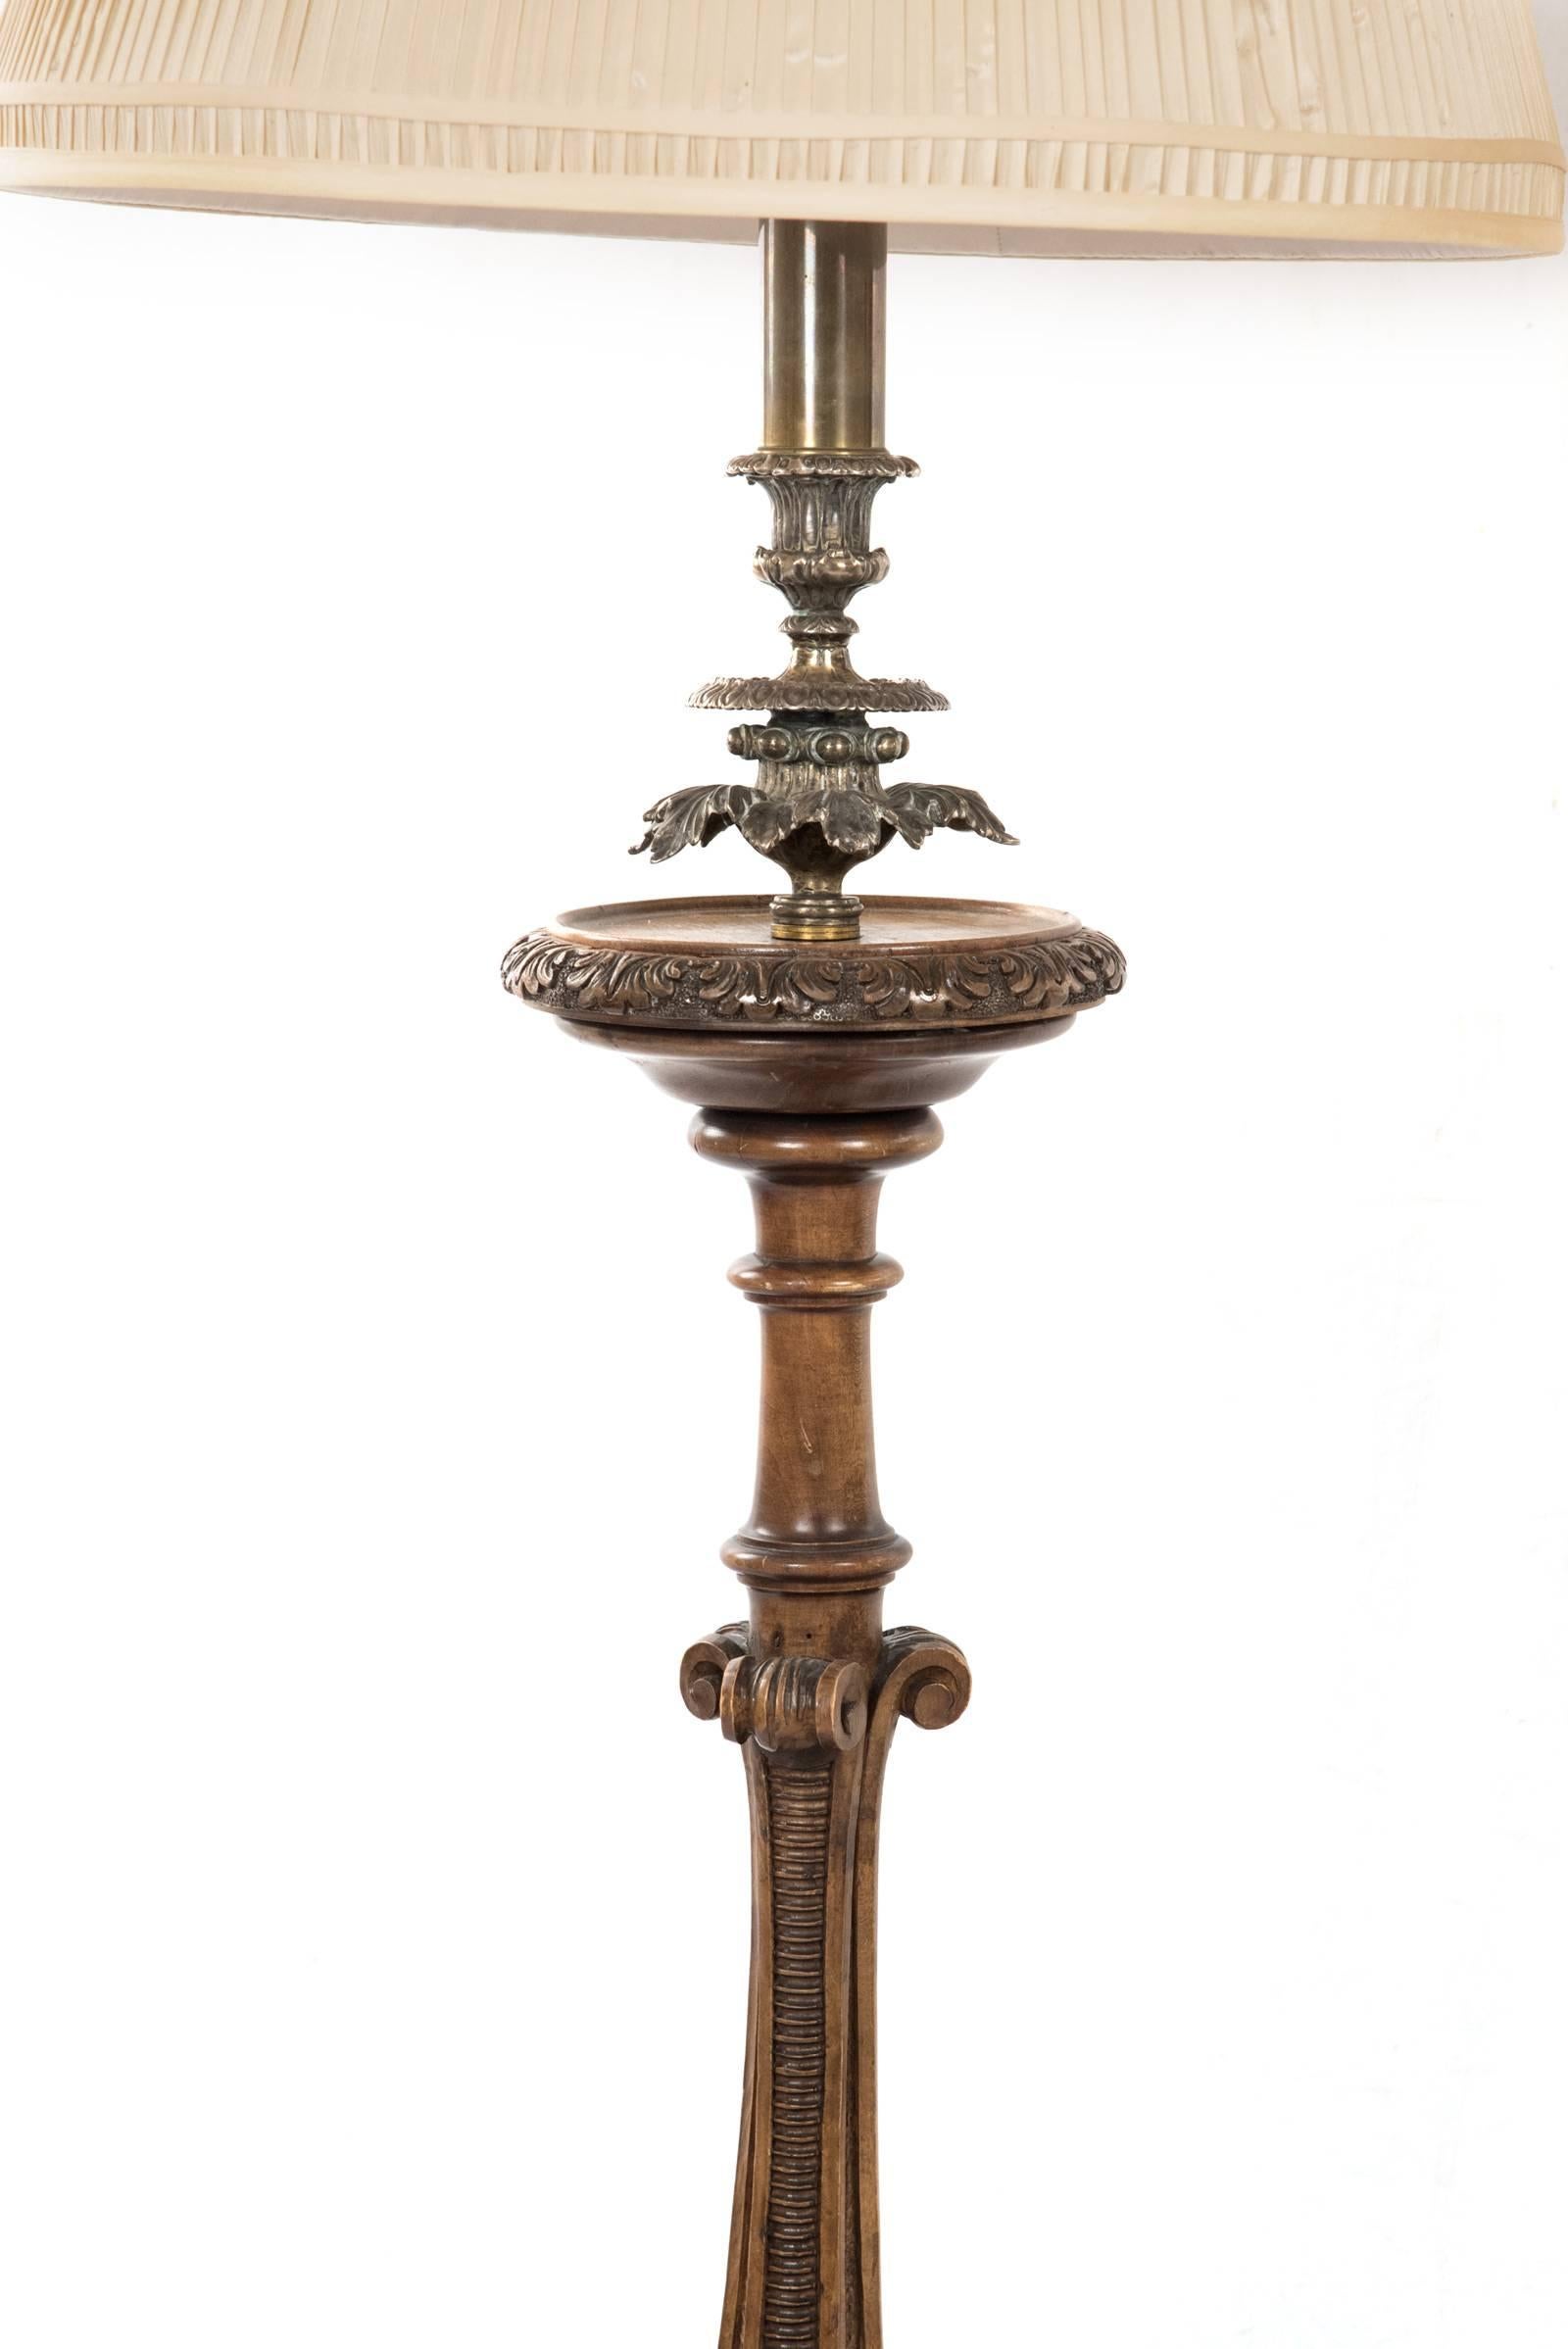 Neoclassical Revival Pair of Carved Wood and Brass Table Lamps